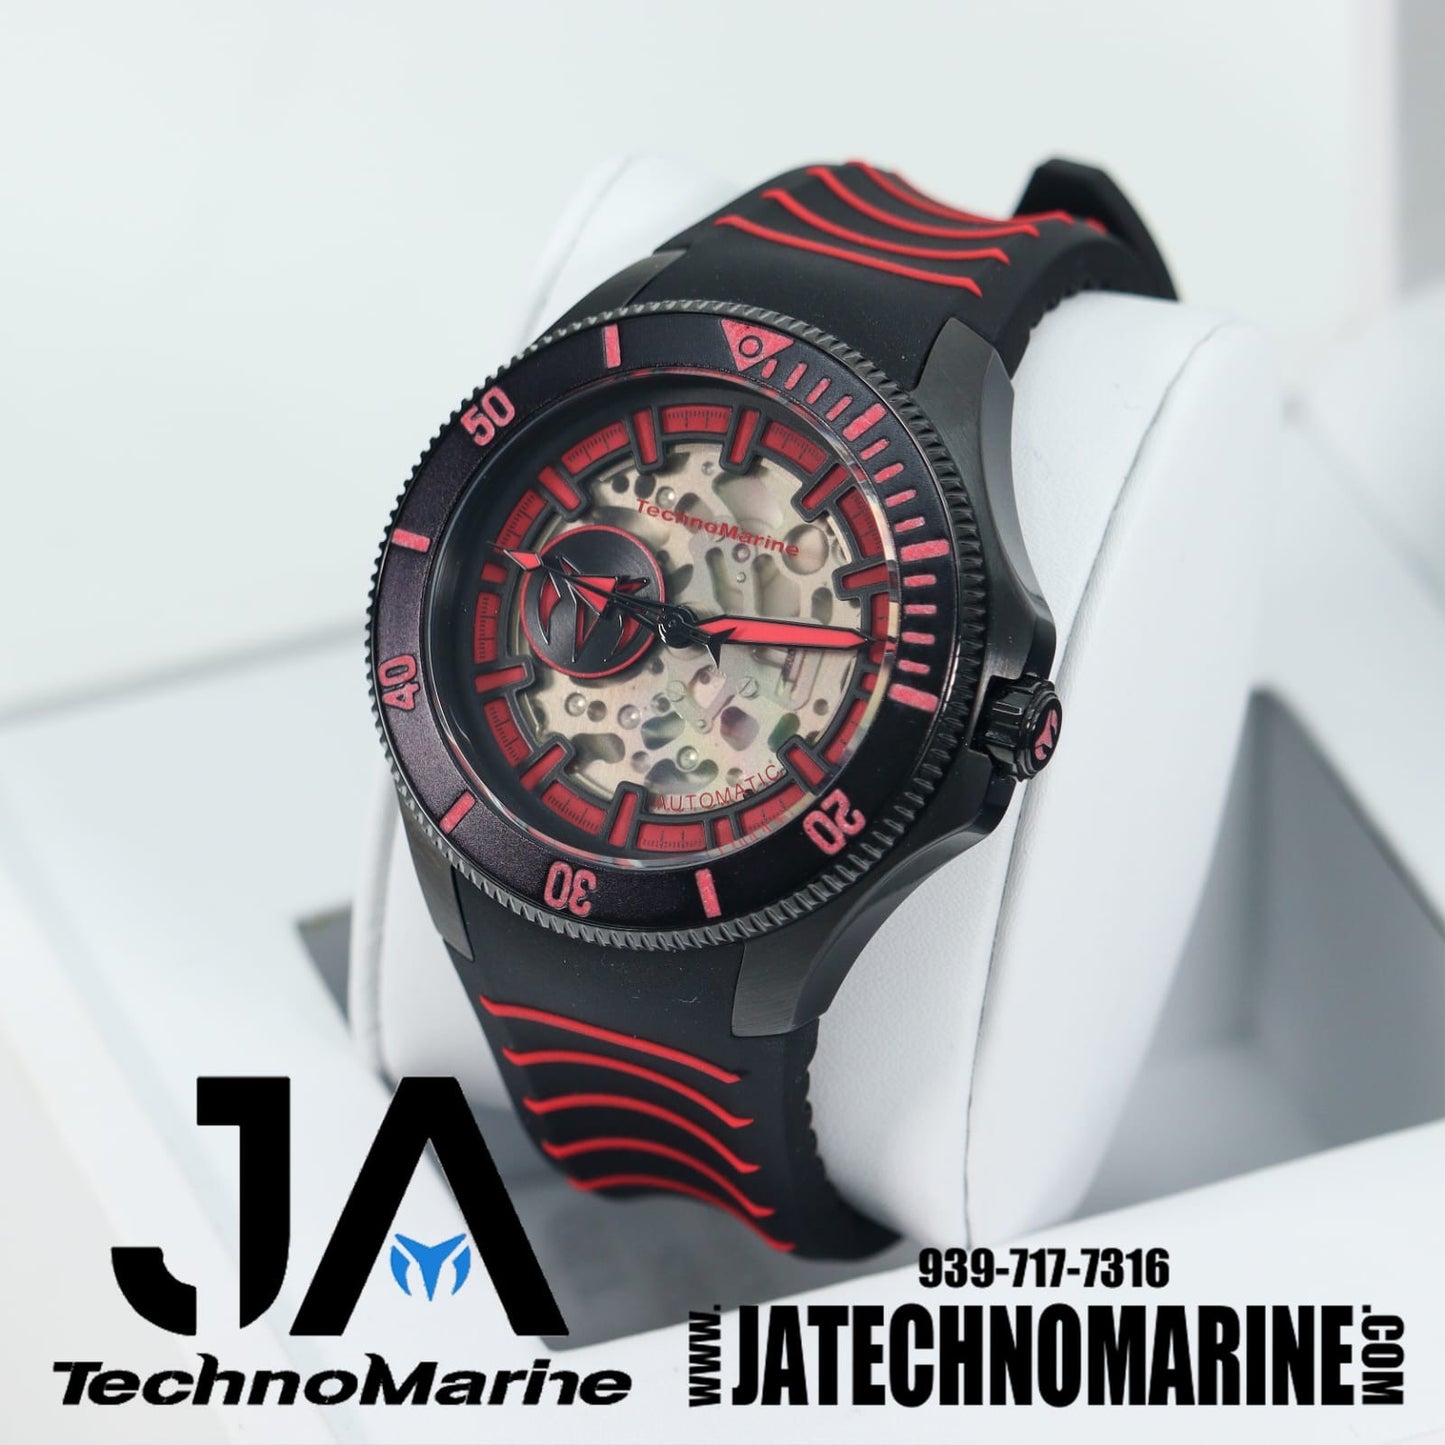 Technomarine Shark Cruise, Men's Watch, Stainless Steel Case, Silicone Strap, Mechanicall Automatic